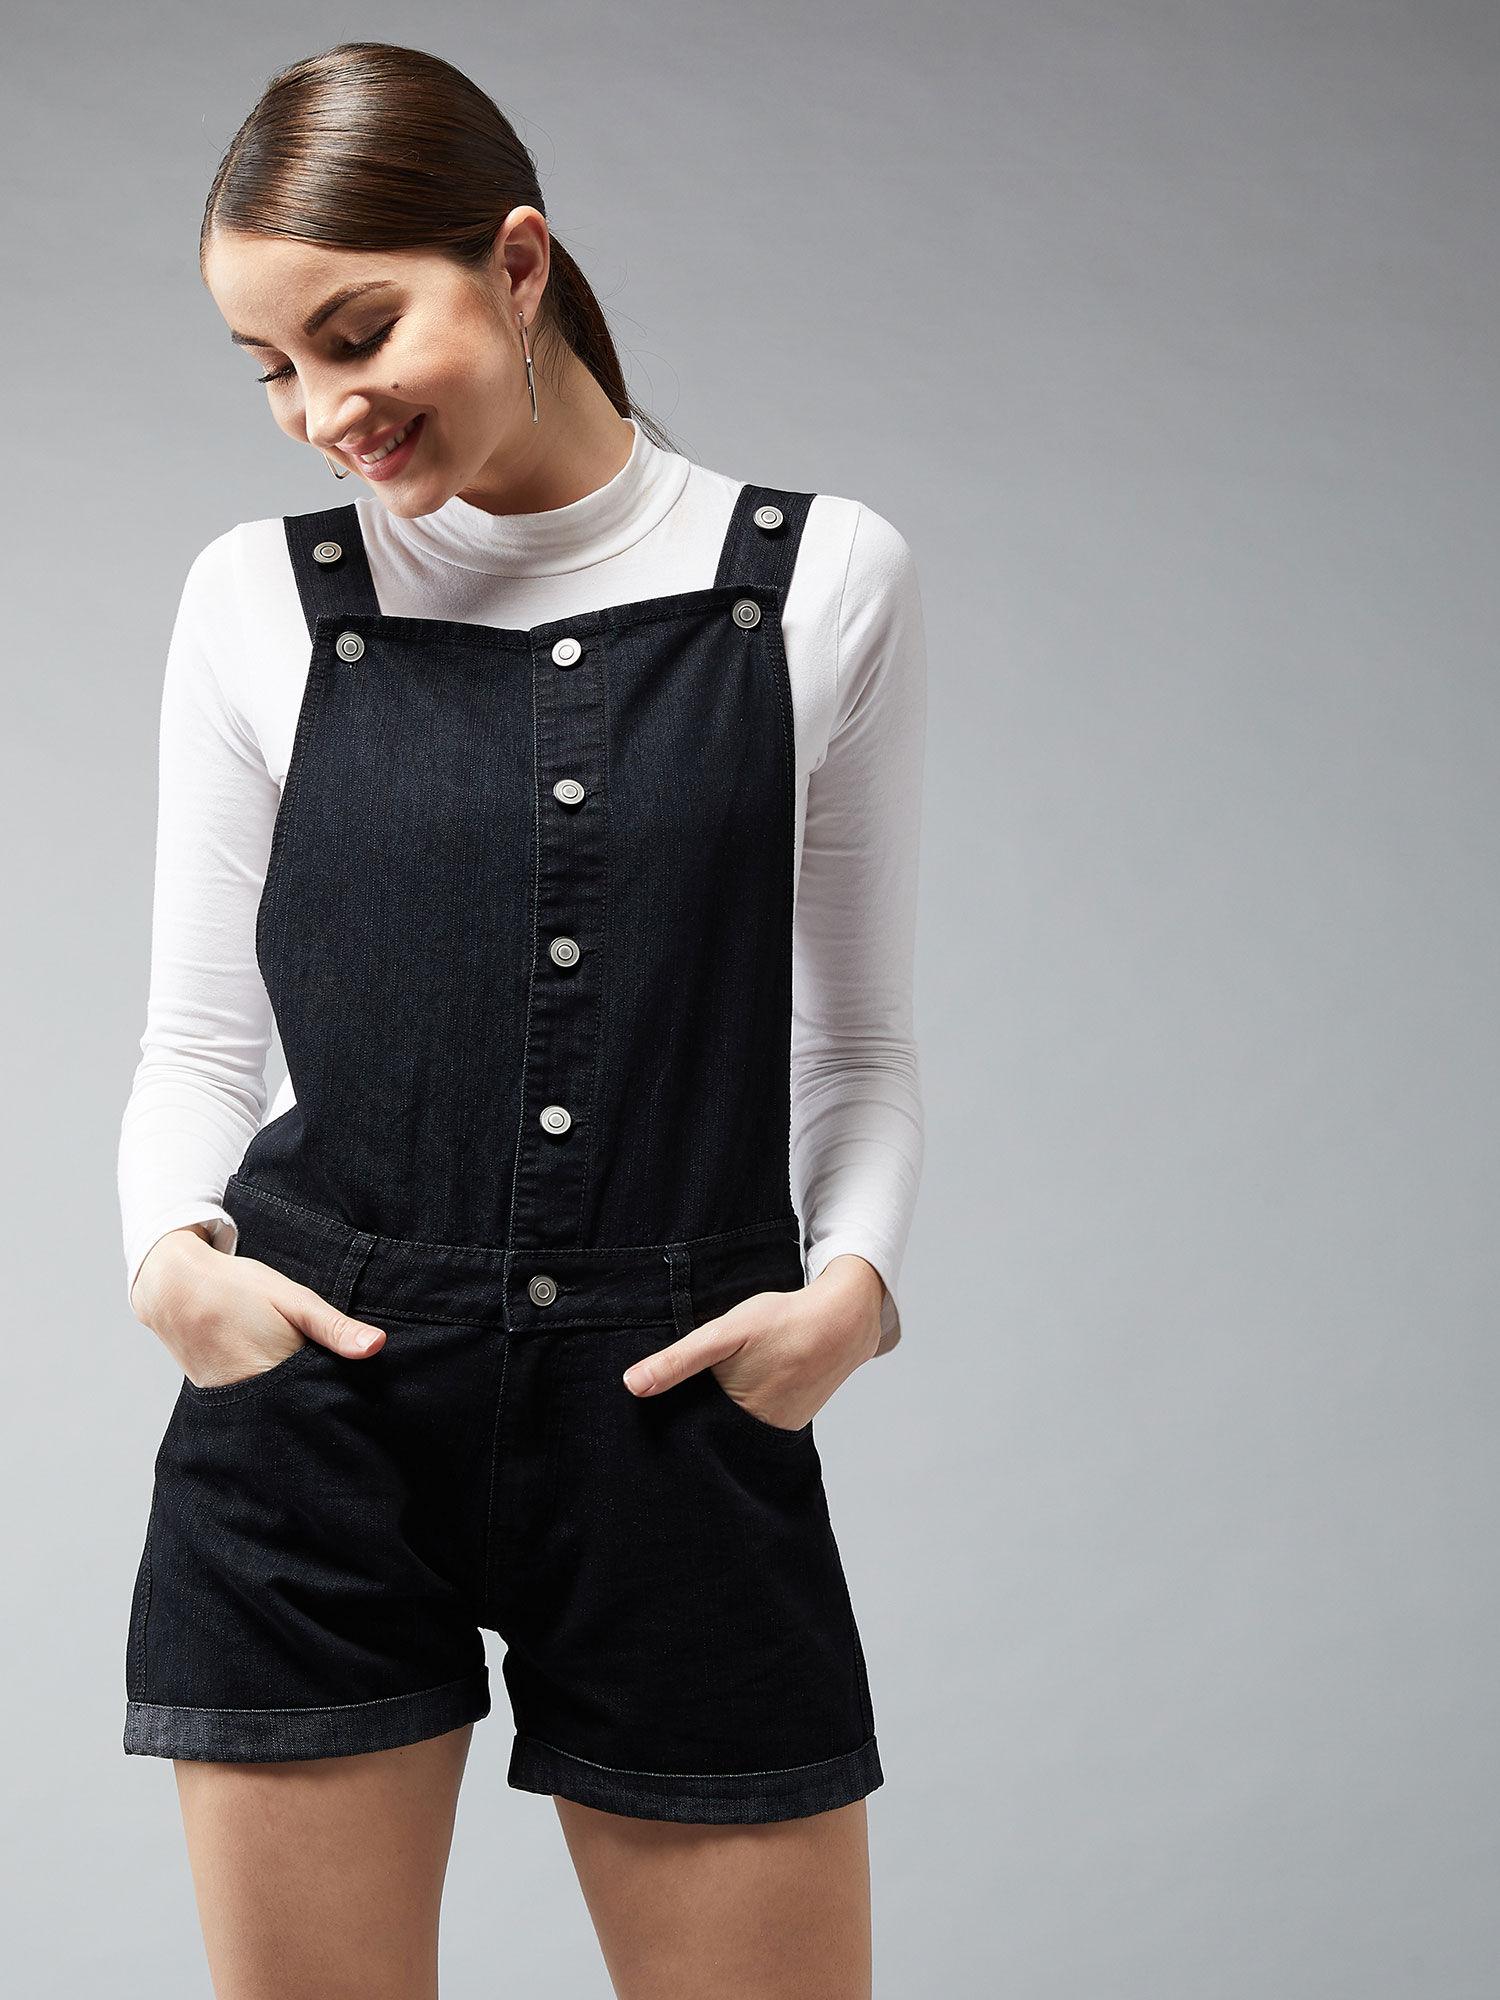 women's black non-stretchable solid mid rise regular length denim dungarees